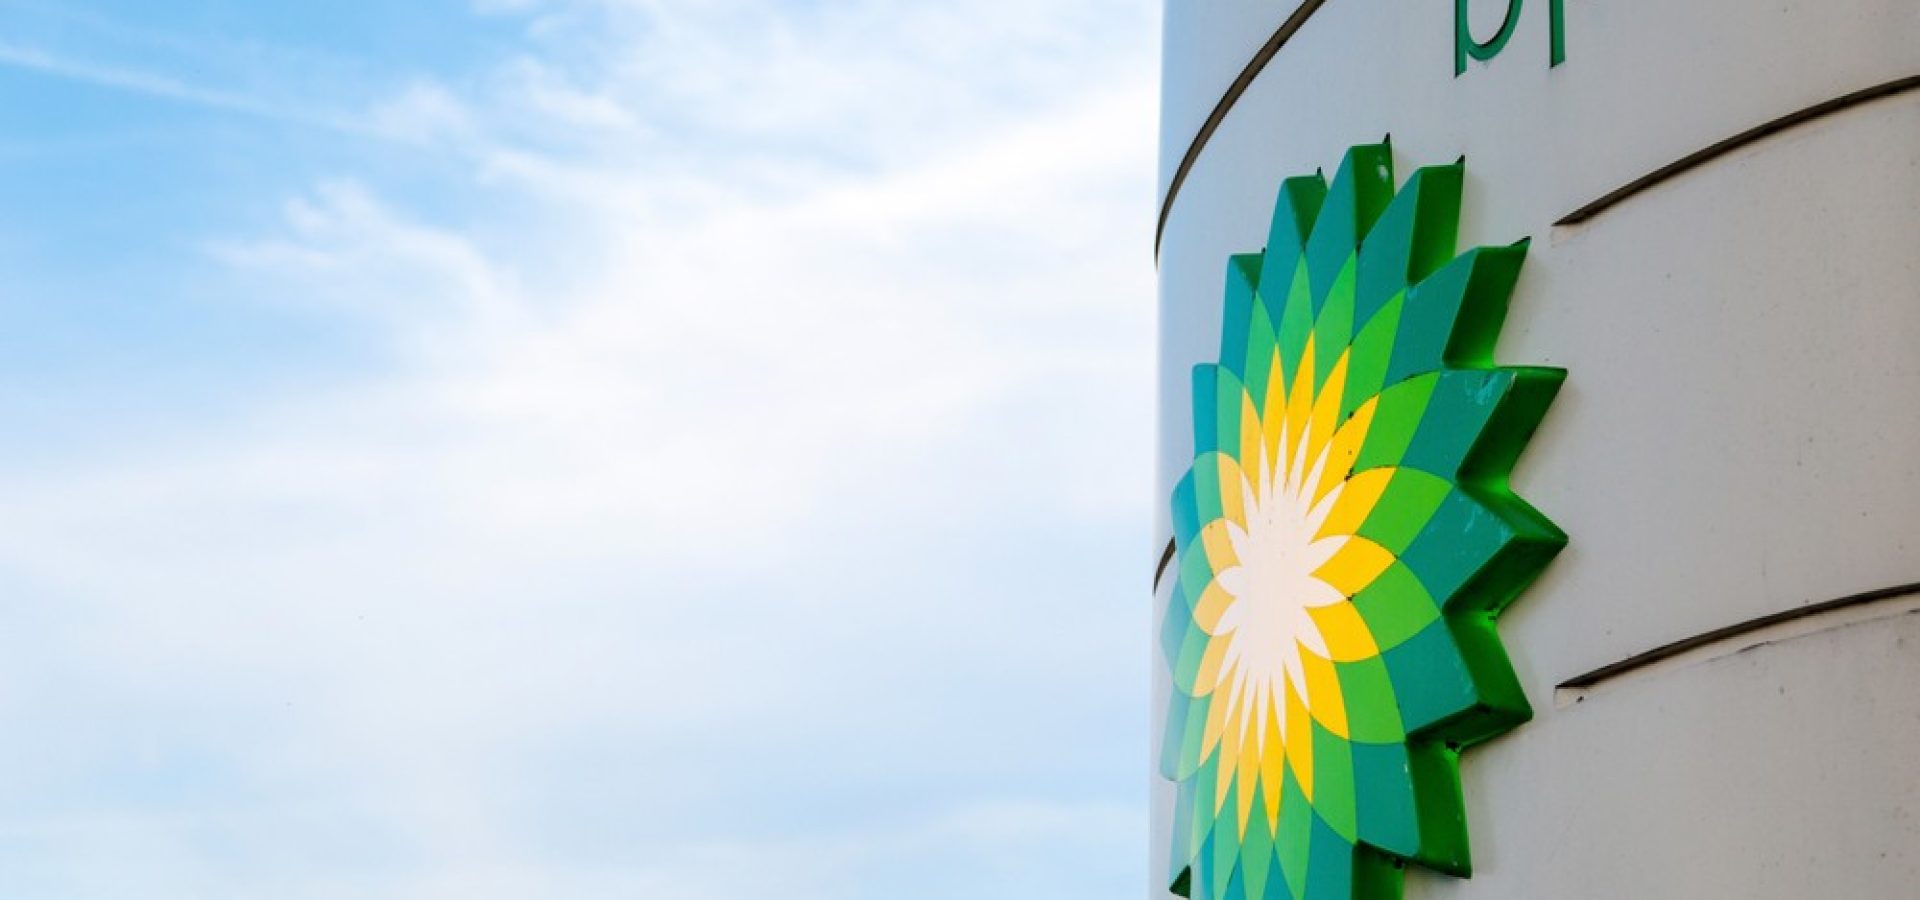 Oil Giant BP Surpassed Expectations in the Third Quarter